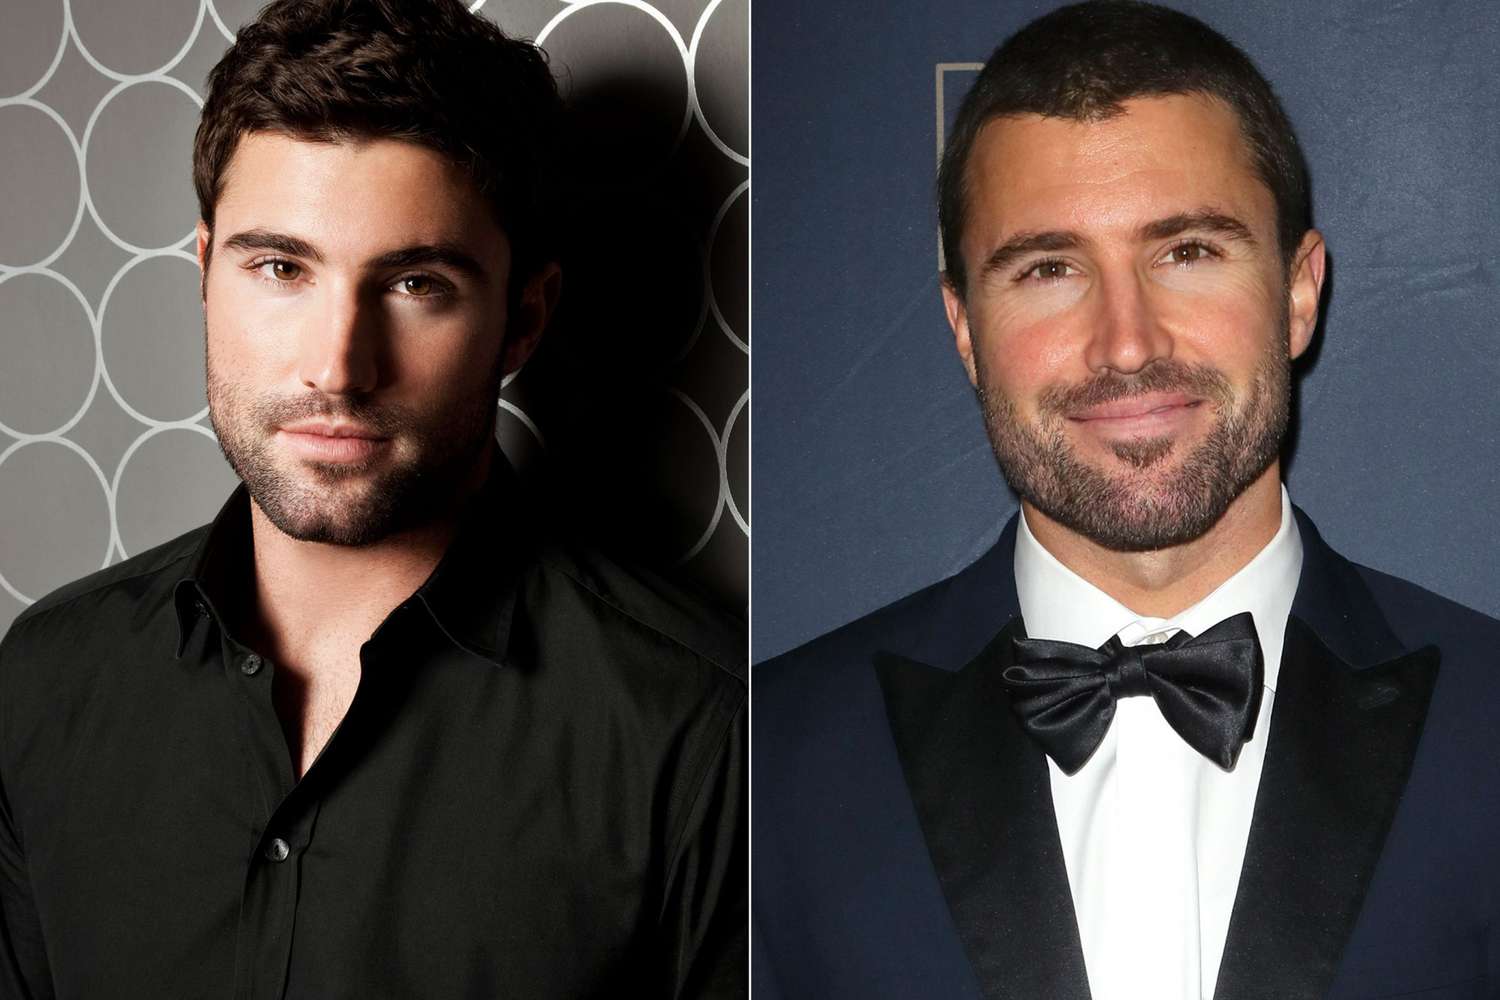 BRODY JENNER: YES